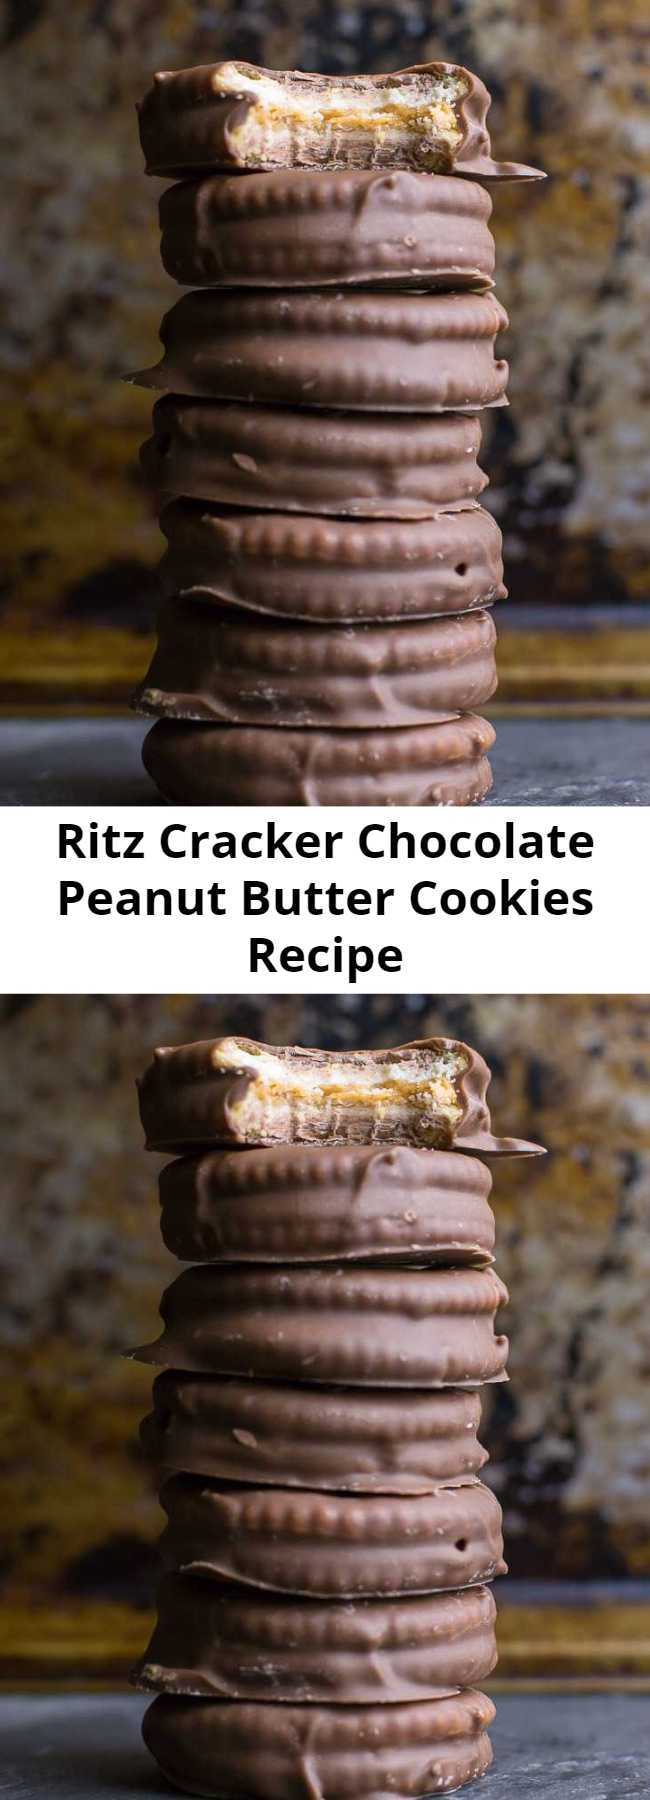 Ritz Cracker Chocolate Peanut Butter Cookies Recipe - Ritz Cracker Chocolate Peanut Butter Cookies are the perfect combo of creamy peanut butter, milk and white chocolate, and butterscotch chips. These freezer cookies are great for making ahead of the busy holiday season but they disappear quickly!